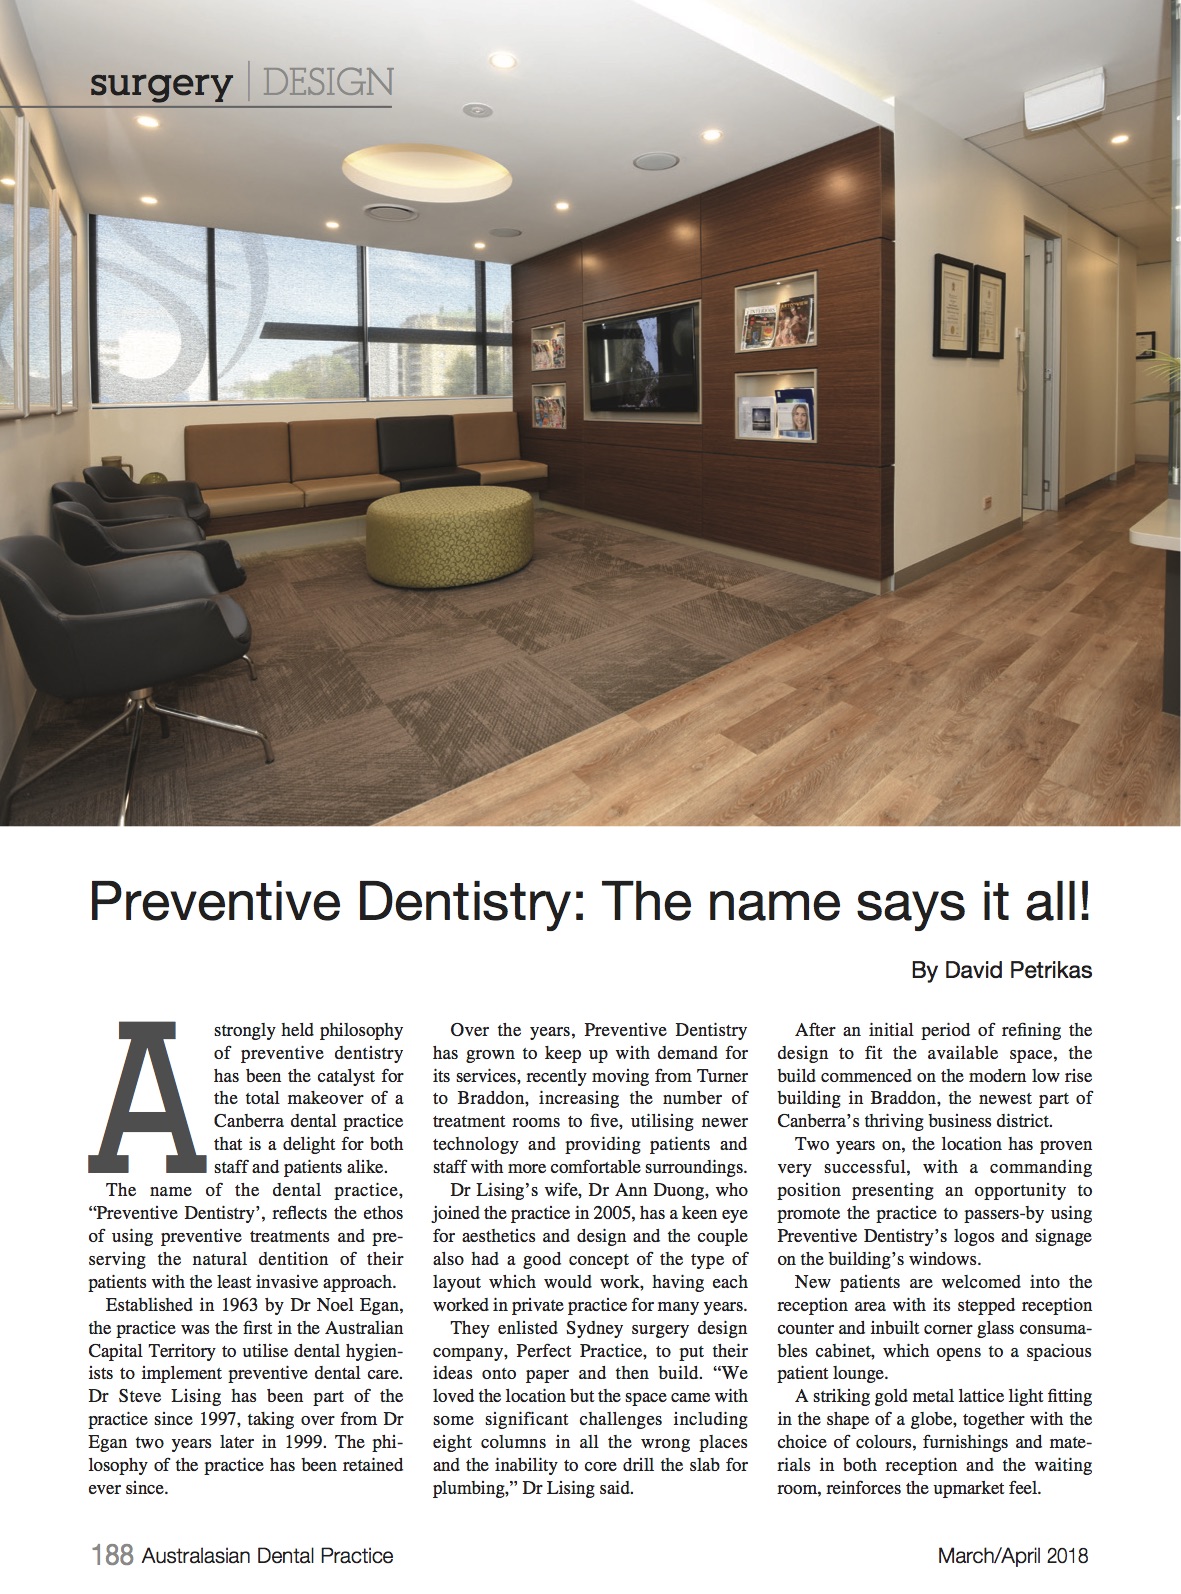 Page 1 of article featuring Preventive Dentistry in Australiasian Dental Practice magazine, April 2018